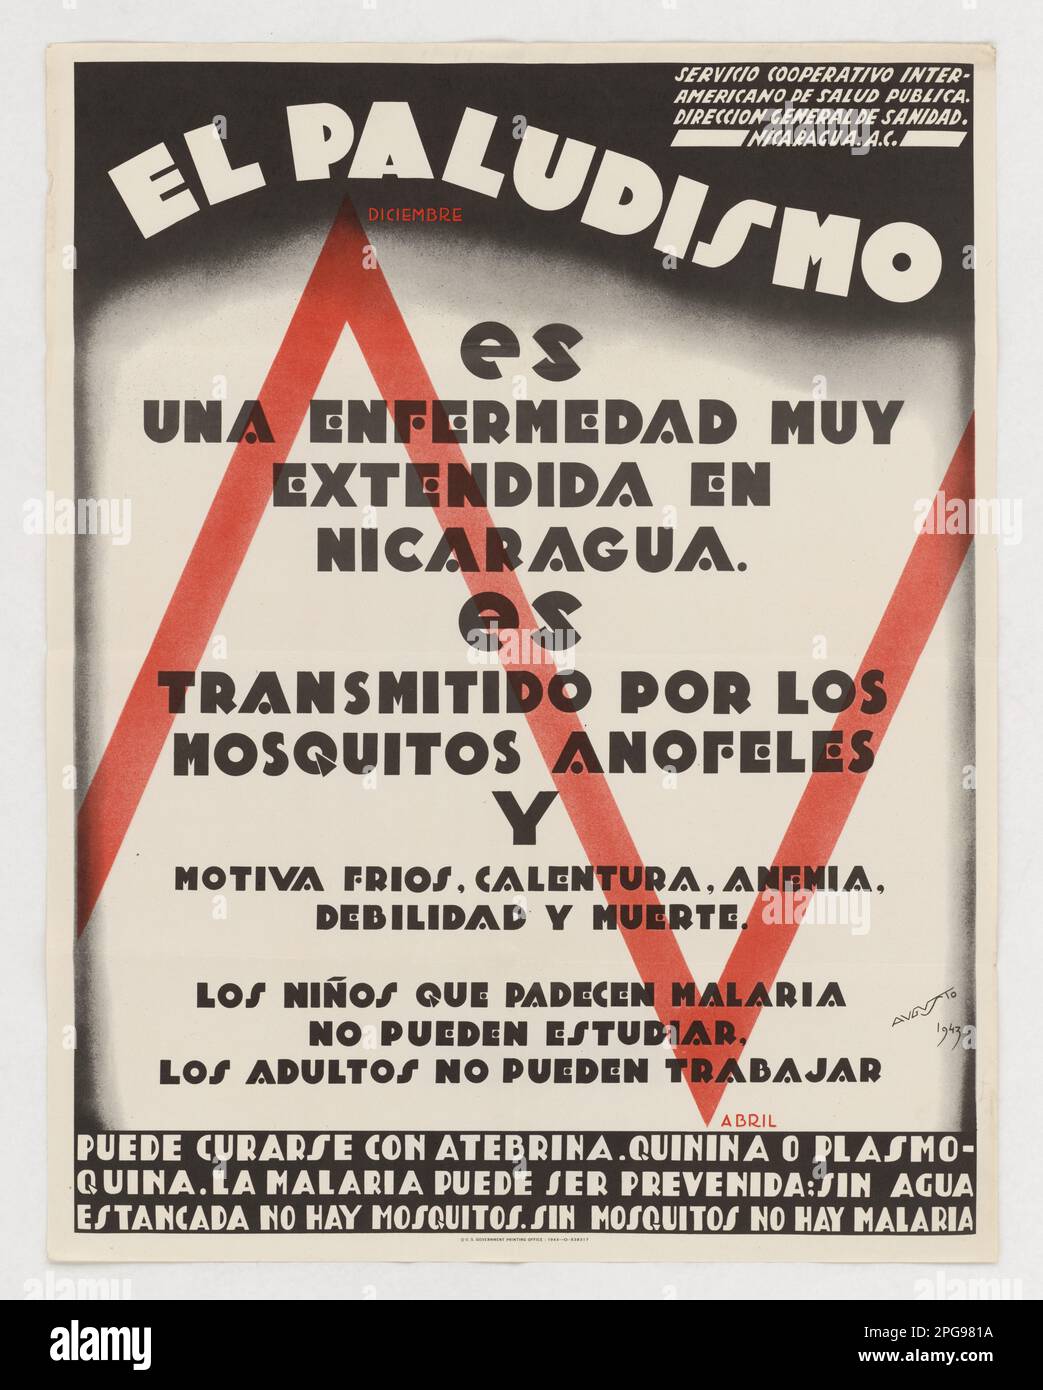 El Paludismo. Country: USA Printed By: U.S. Government Printing Office.  1942 - 1945. Office for Emergency Management.